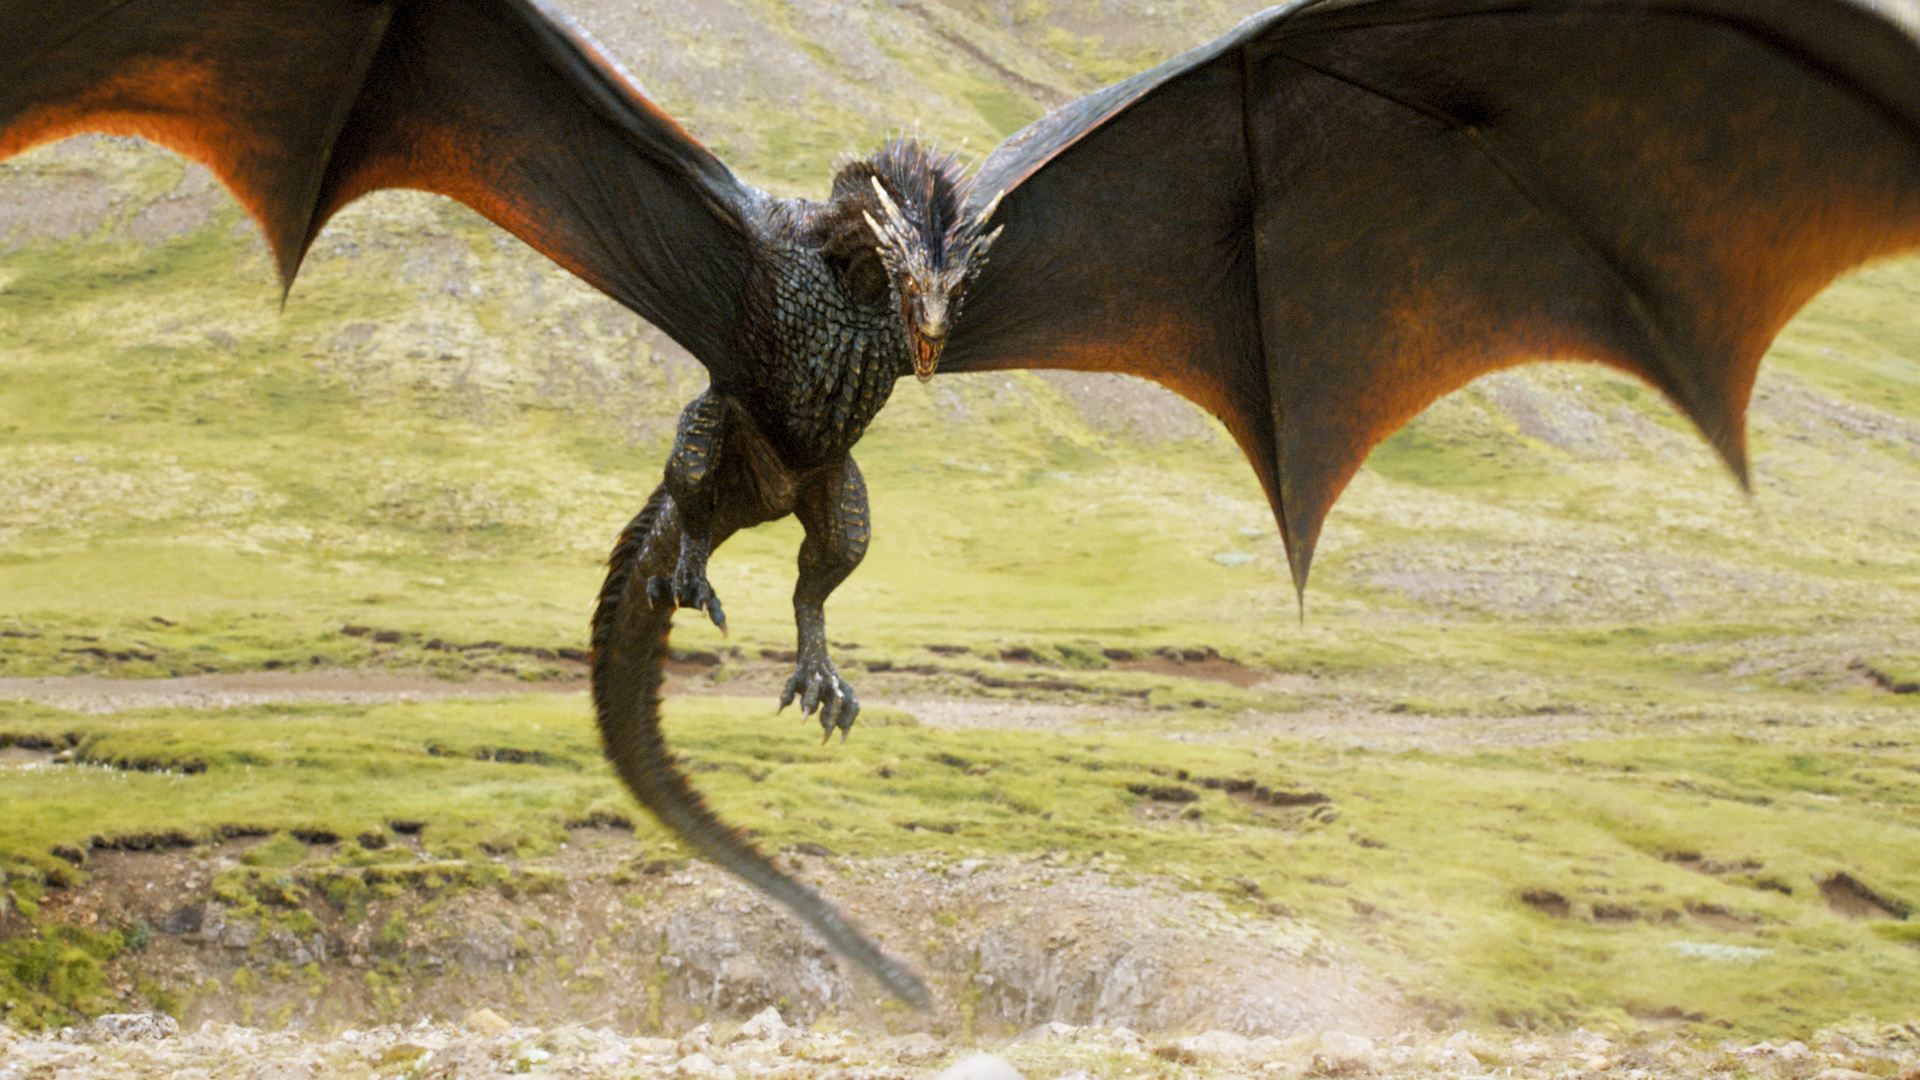 A Scientific Guide To The Fantastical Predators In Game Of Thrones